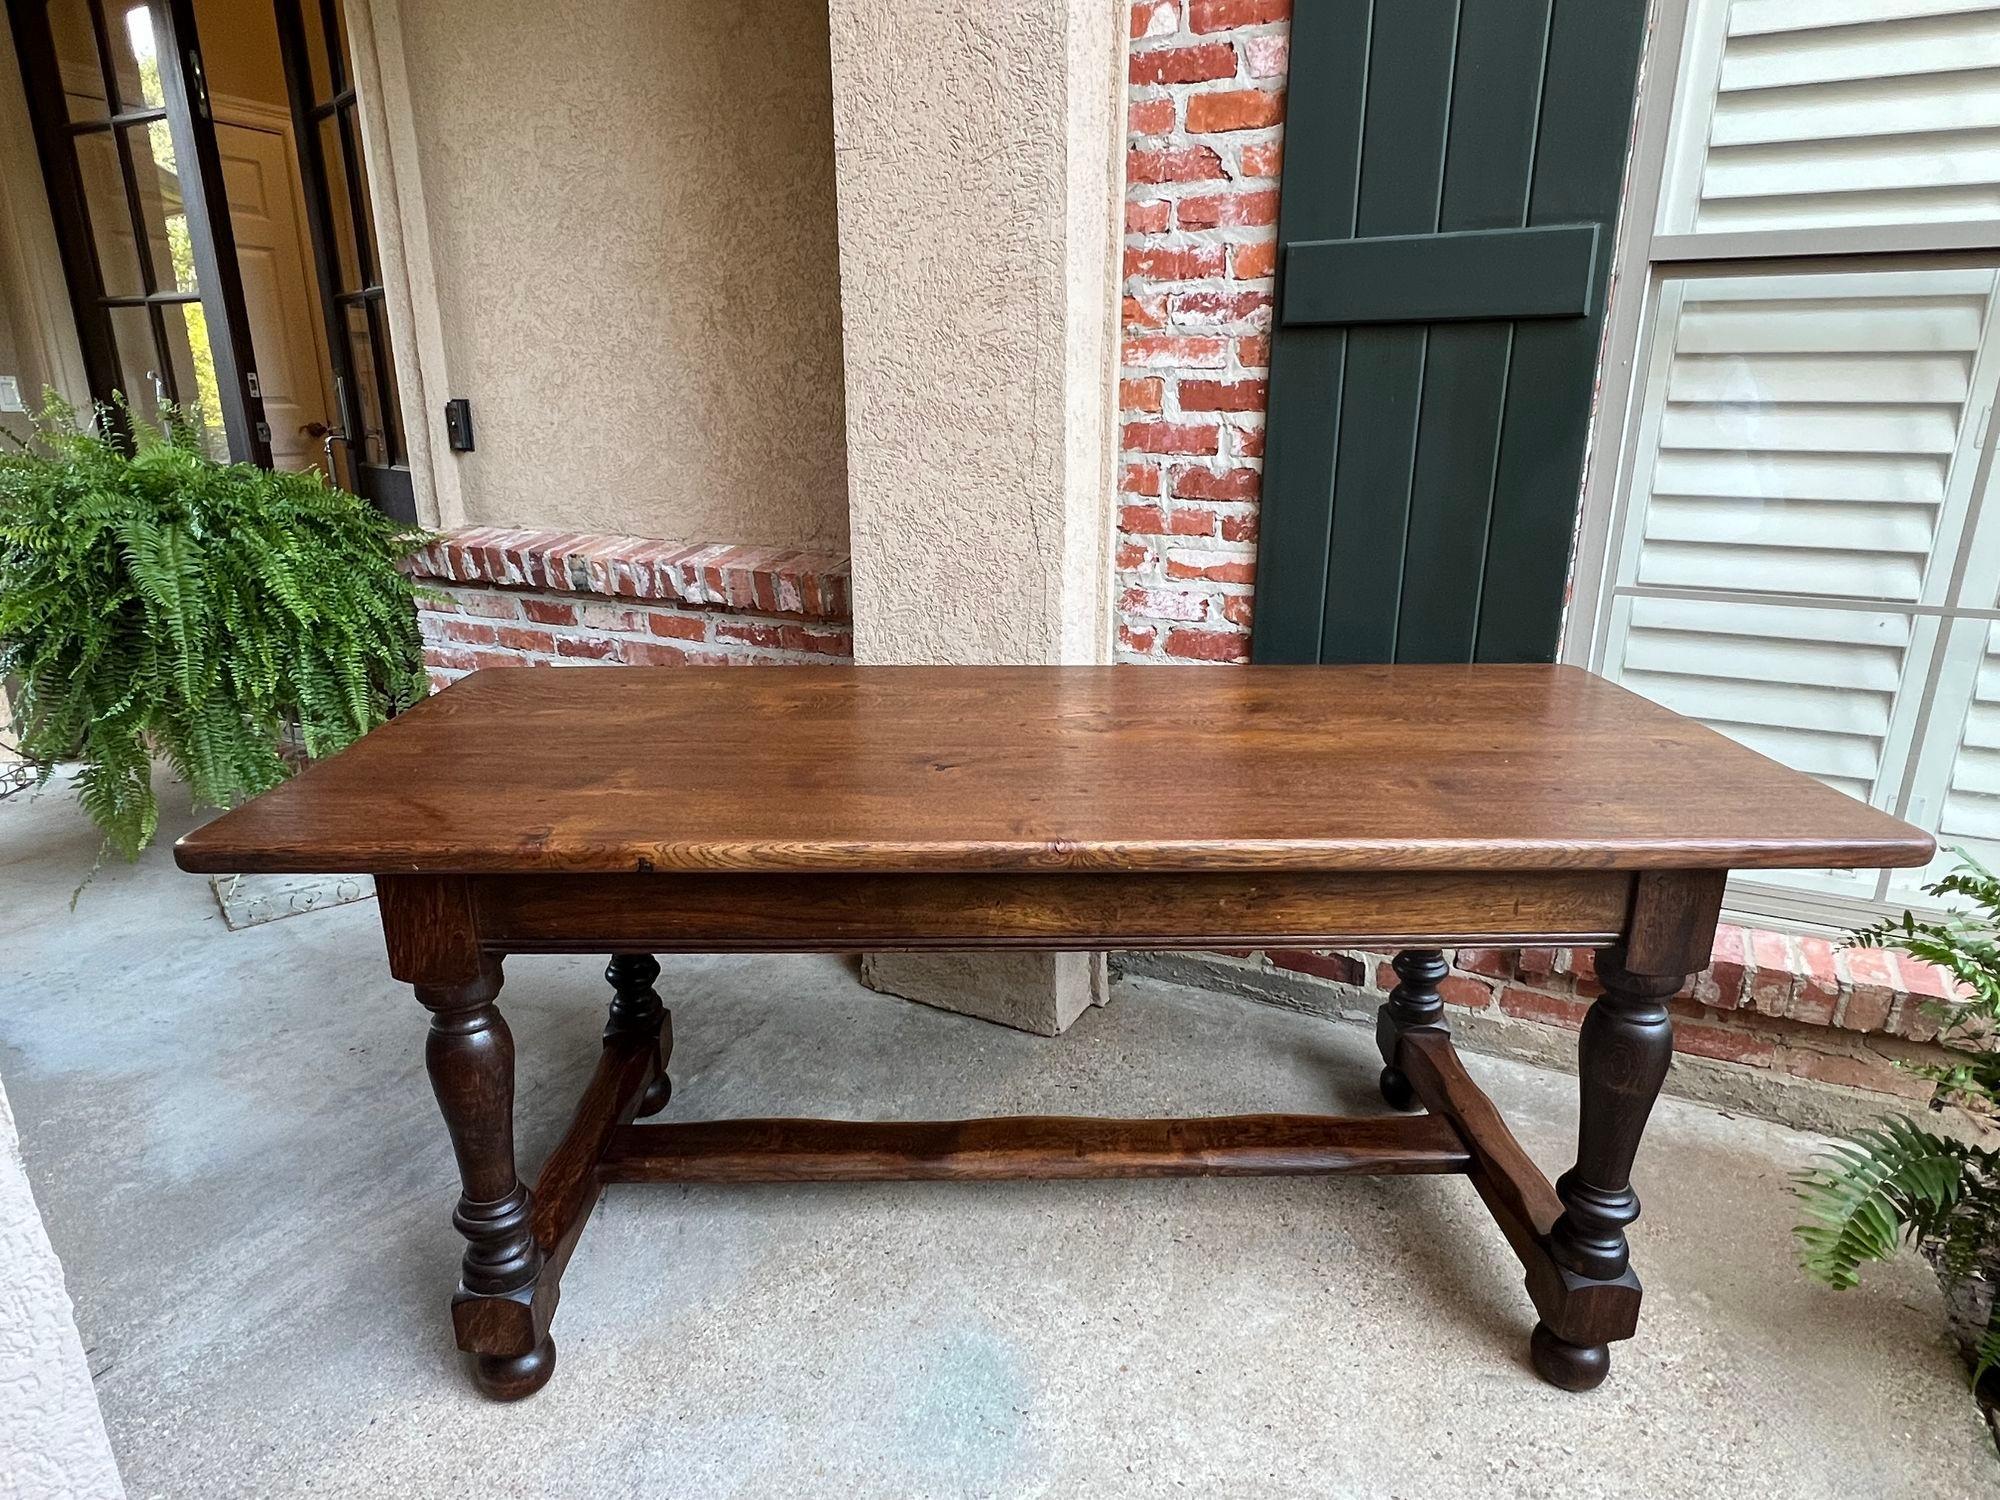 Antique French farm table dining library desk carved Oak Farmhouse 6 ft.

Direct from France, a gorgeous (and quite heavy) antique French oak dining table or conference/library table in a large 71” length!
These tables are one of our most